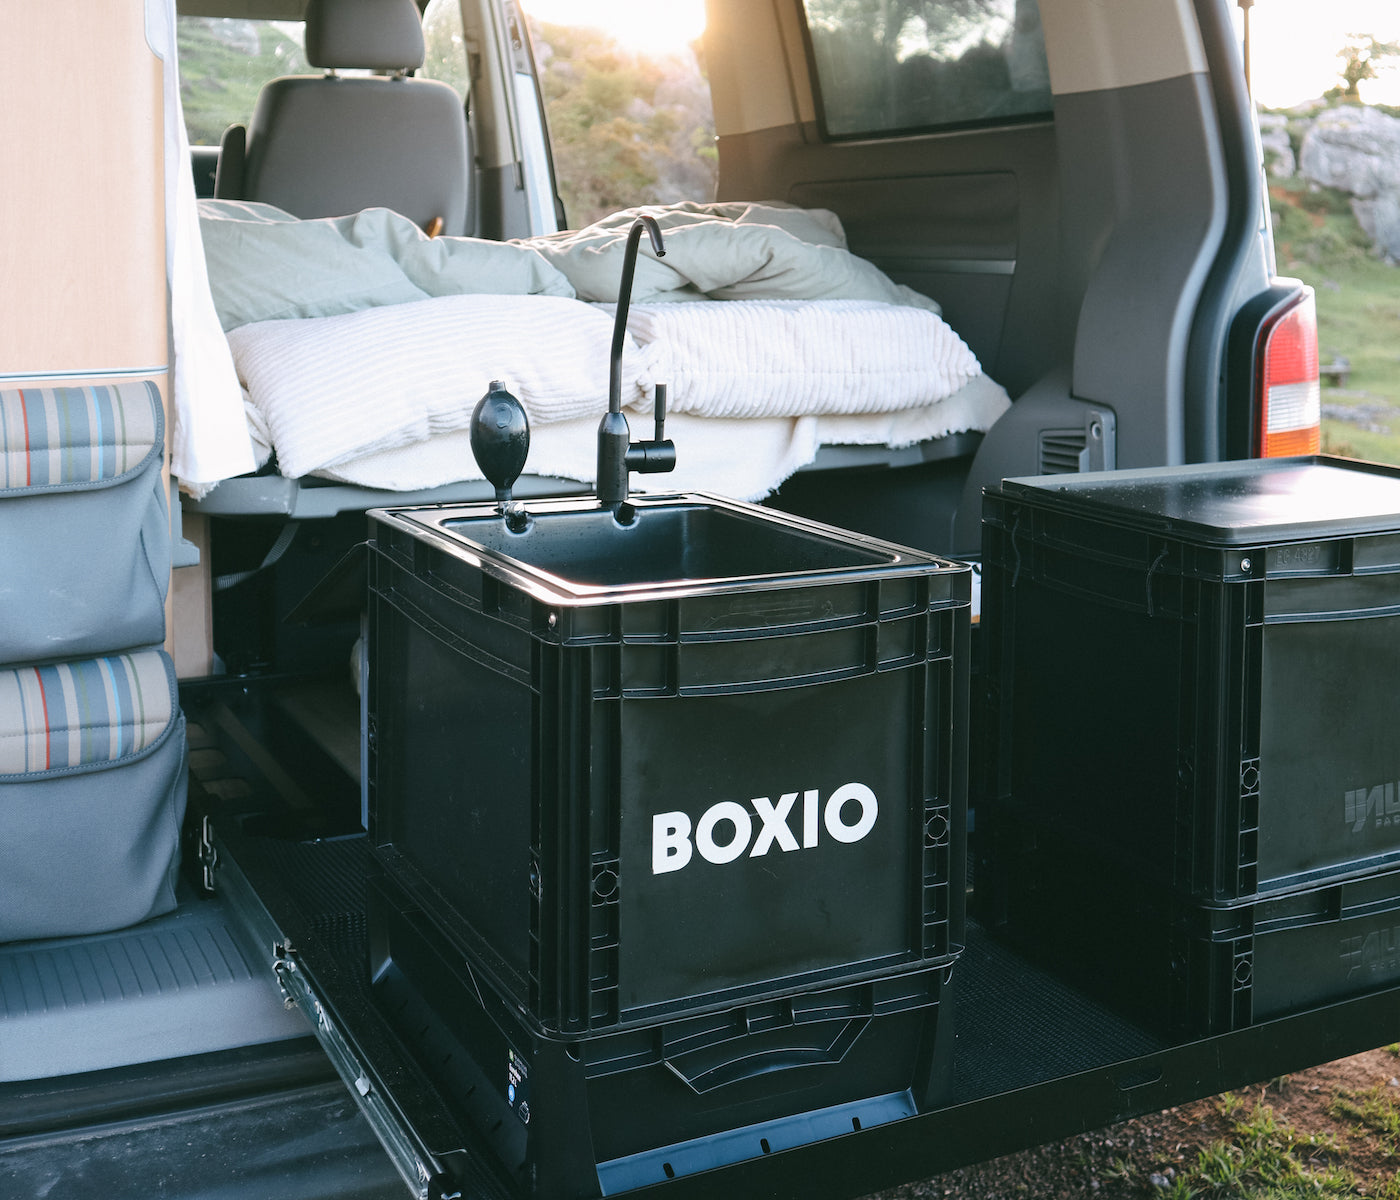 ➡️ BOXIO-WASH - Mobile Washing Station For Camping & Outdoor